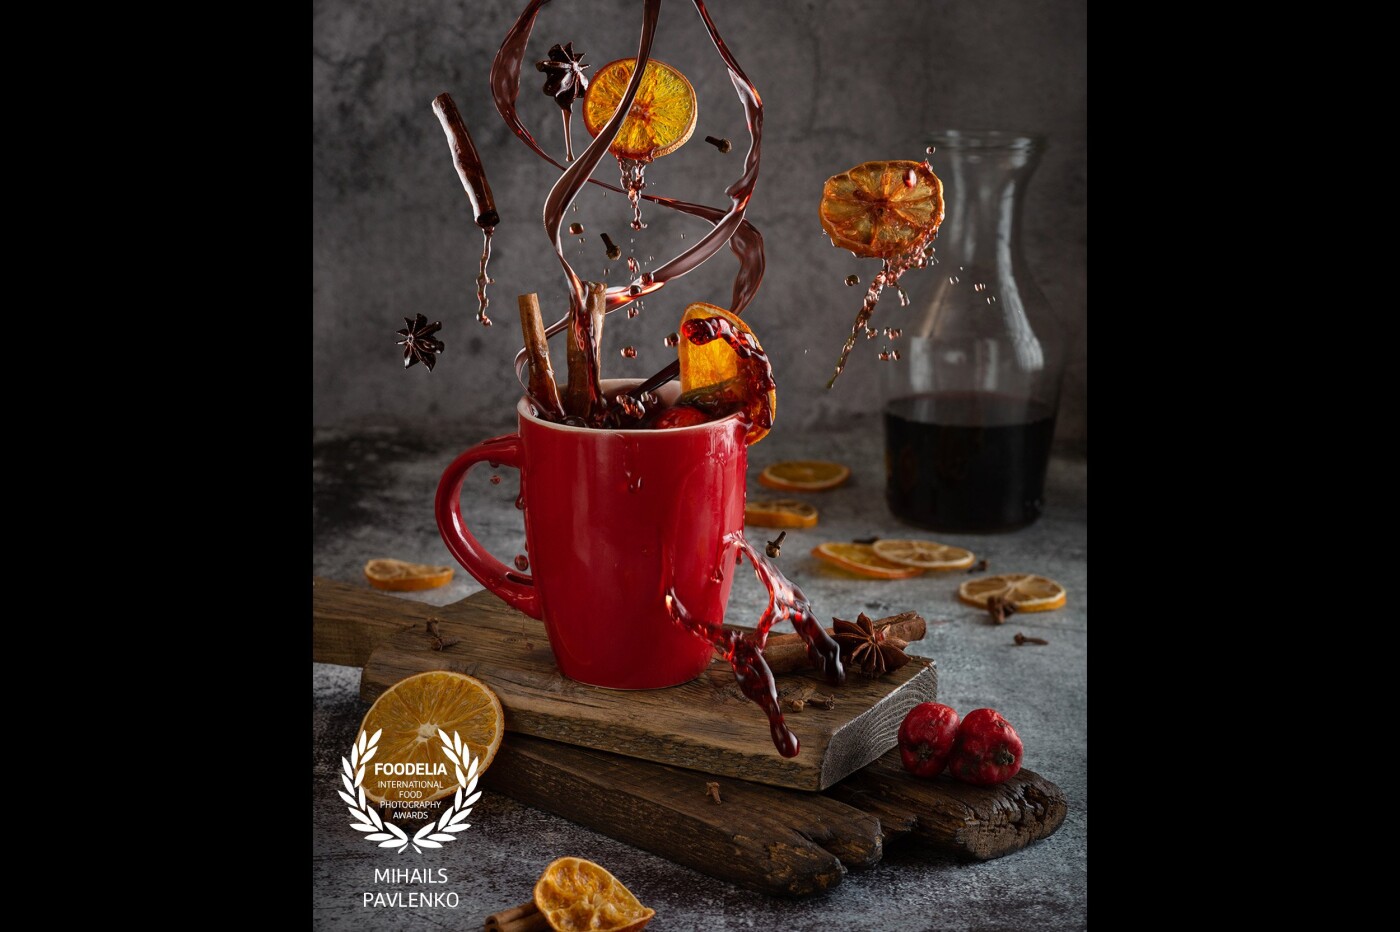 A tasty hot drink is called mulled wine or glint wine. <br />
Traditionally, red wine was heated to 70-80 degrees with cinnamon sticks, anise, cloves and pieces of fruit. Initially, red wine began to heat up in medieval Europe to prevent disease and to fight hypothermia.